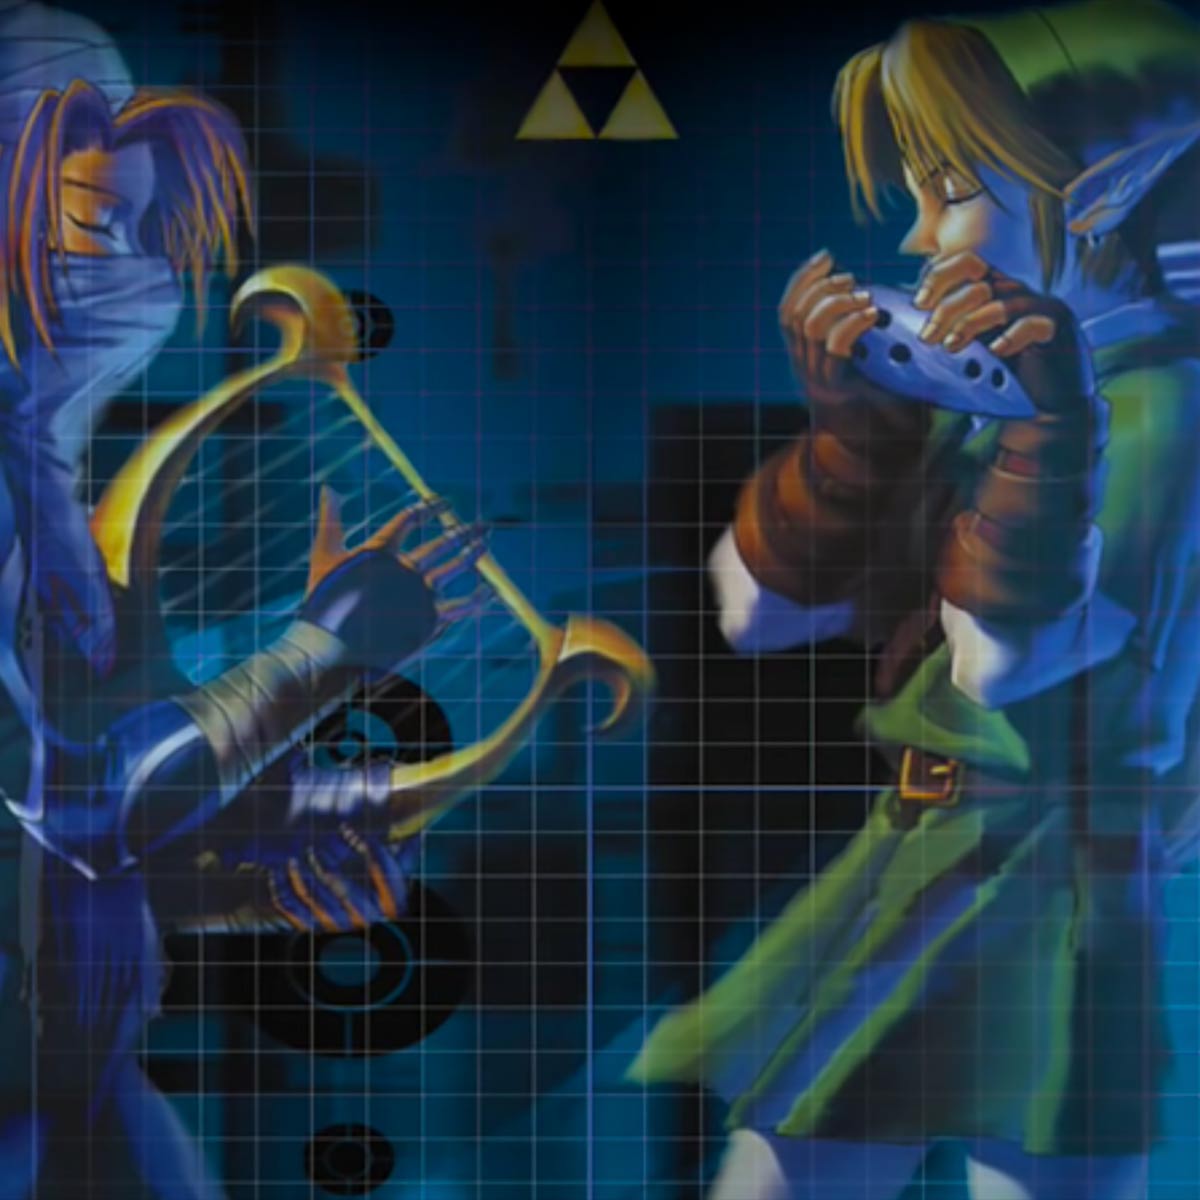 Legend of Zelda: Ocarina of Time - Song of Storms Extended (10